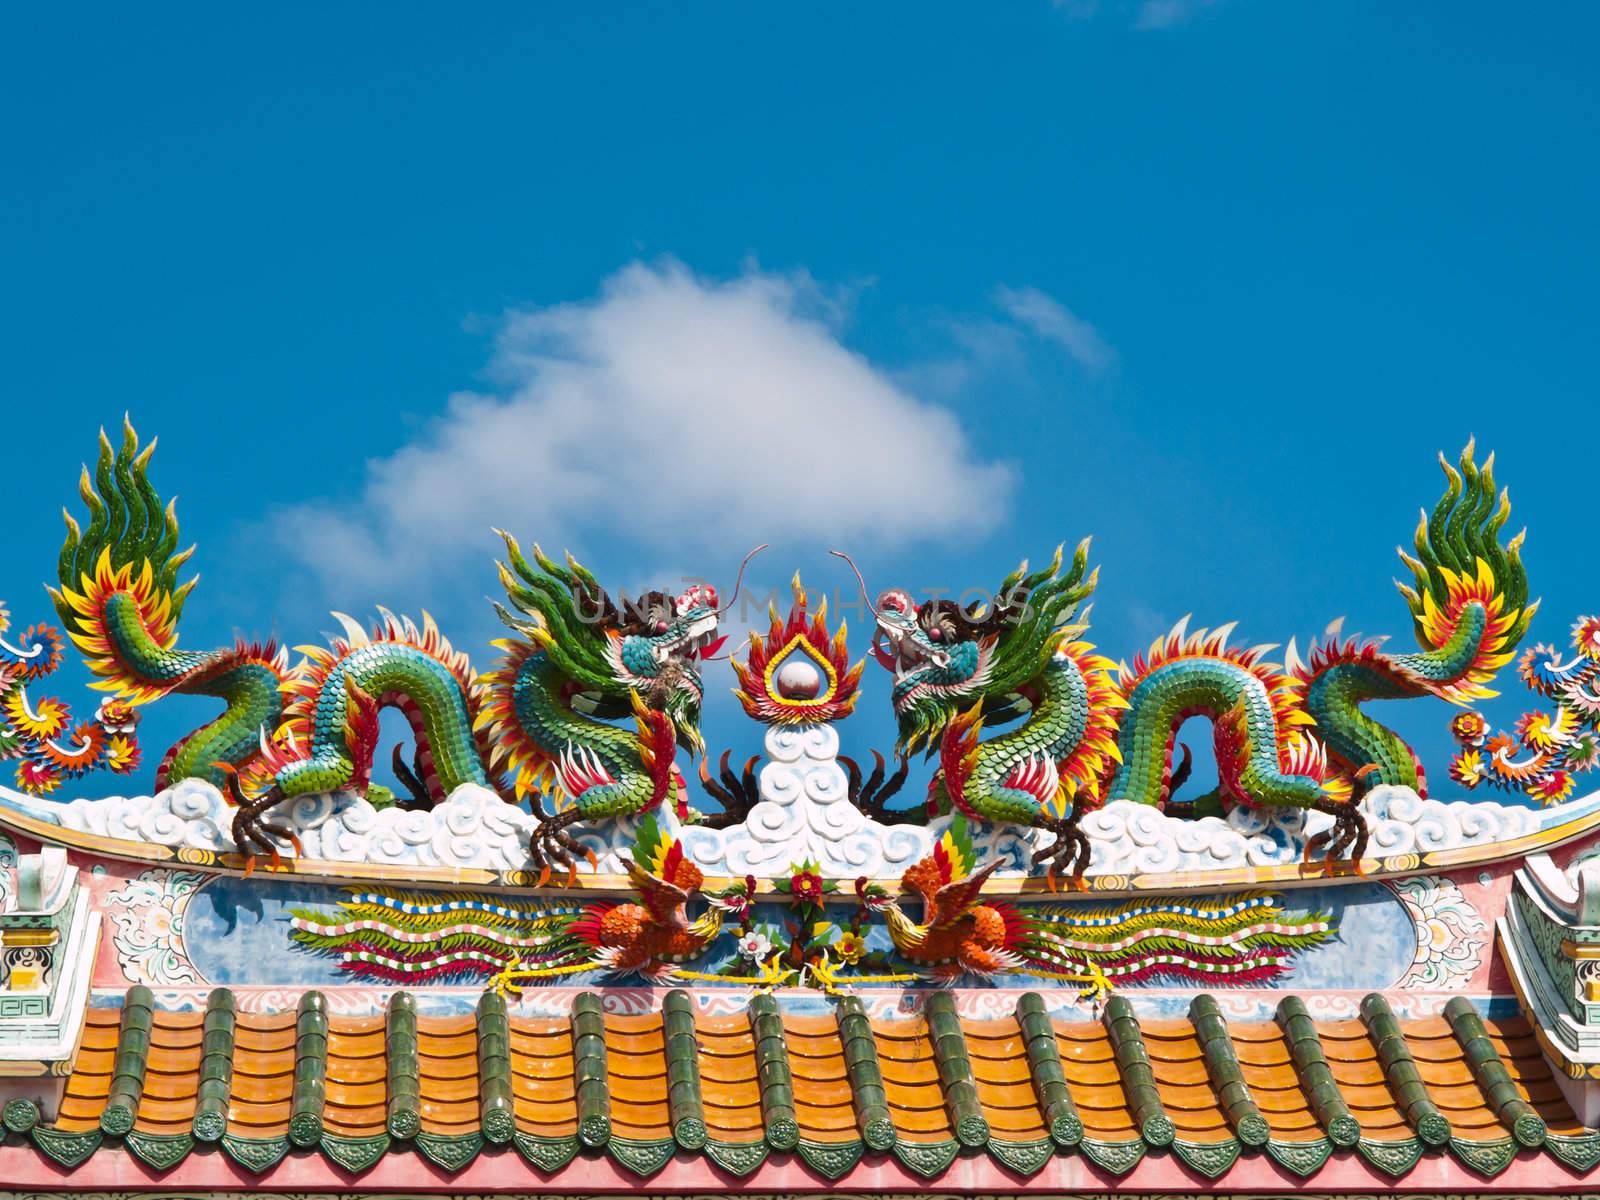 Dragon sculpture on roof of temple  by FrameAngel